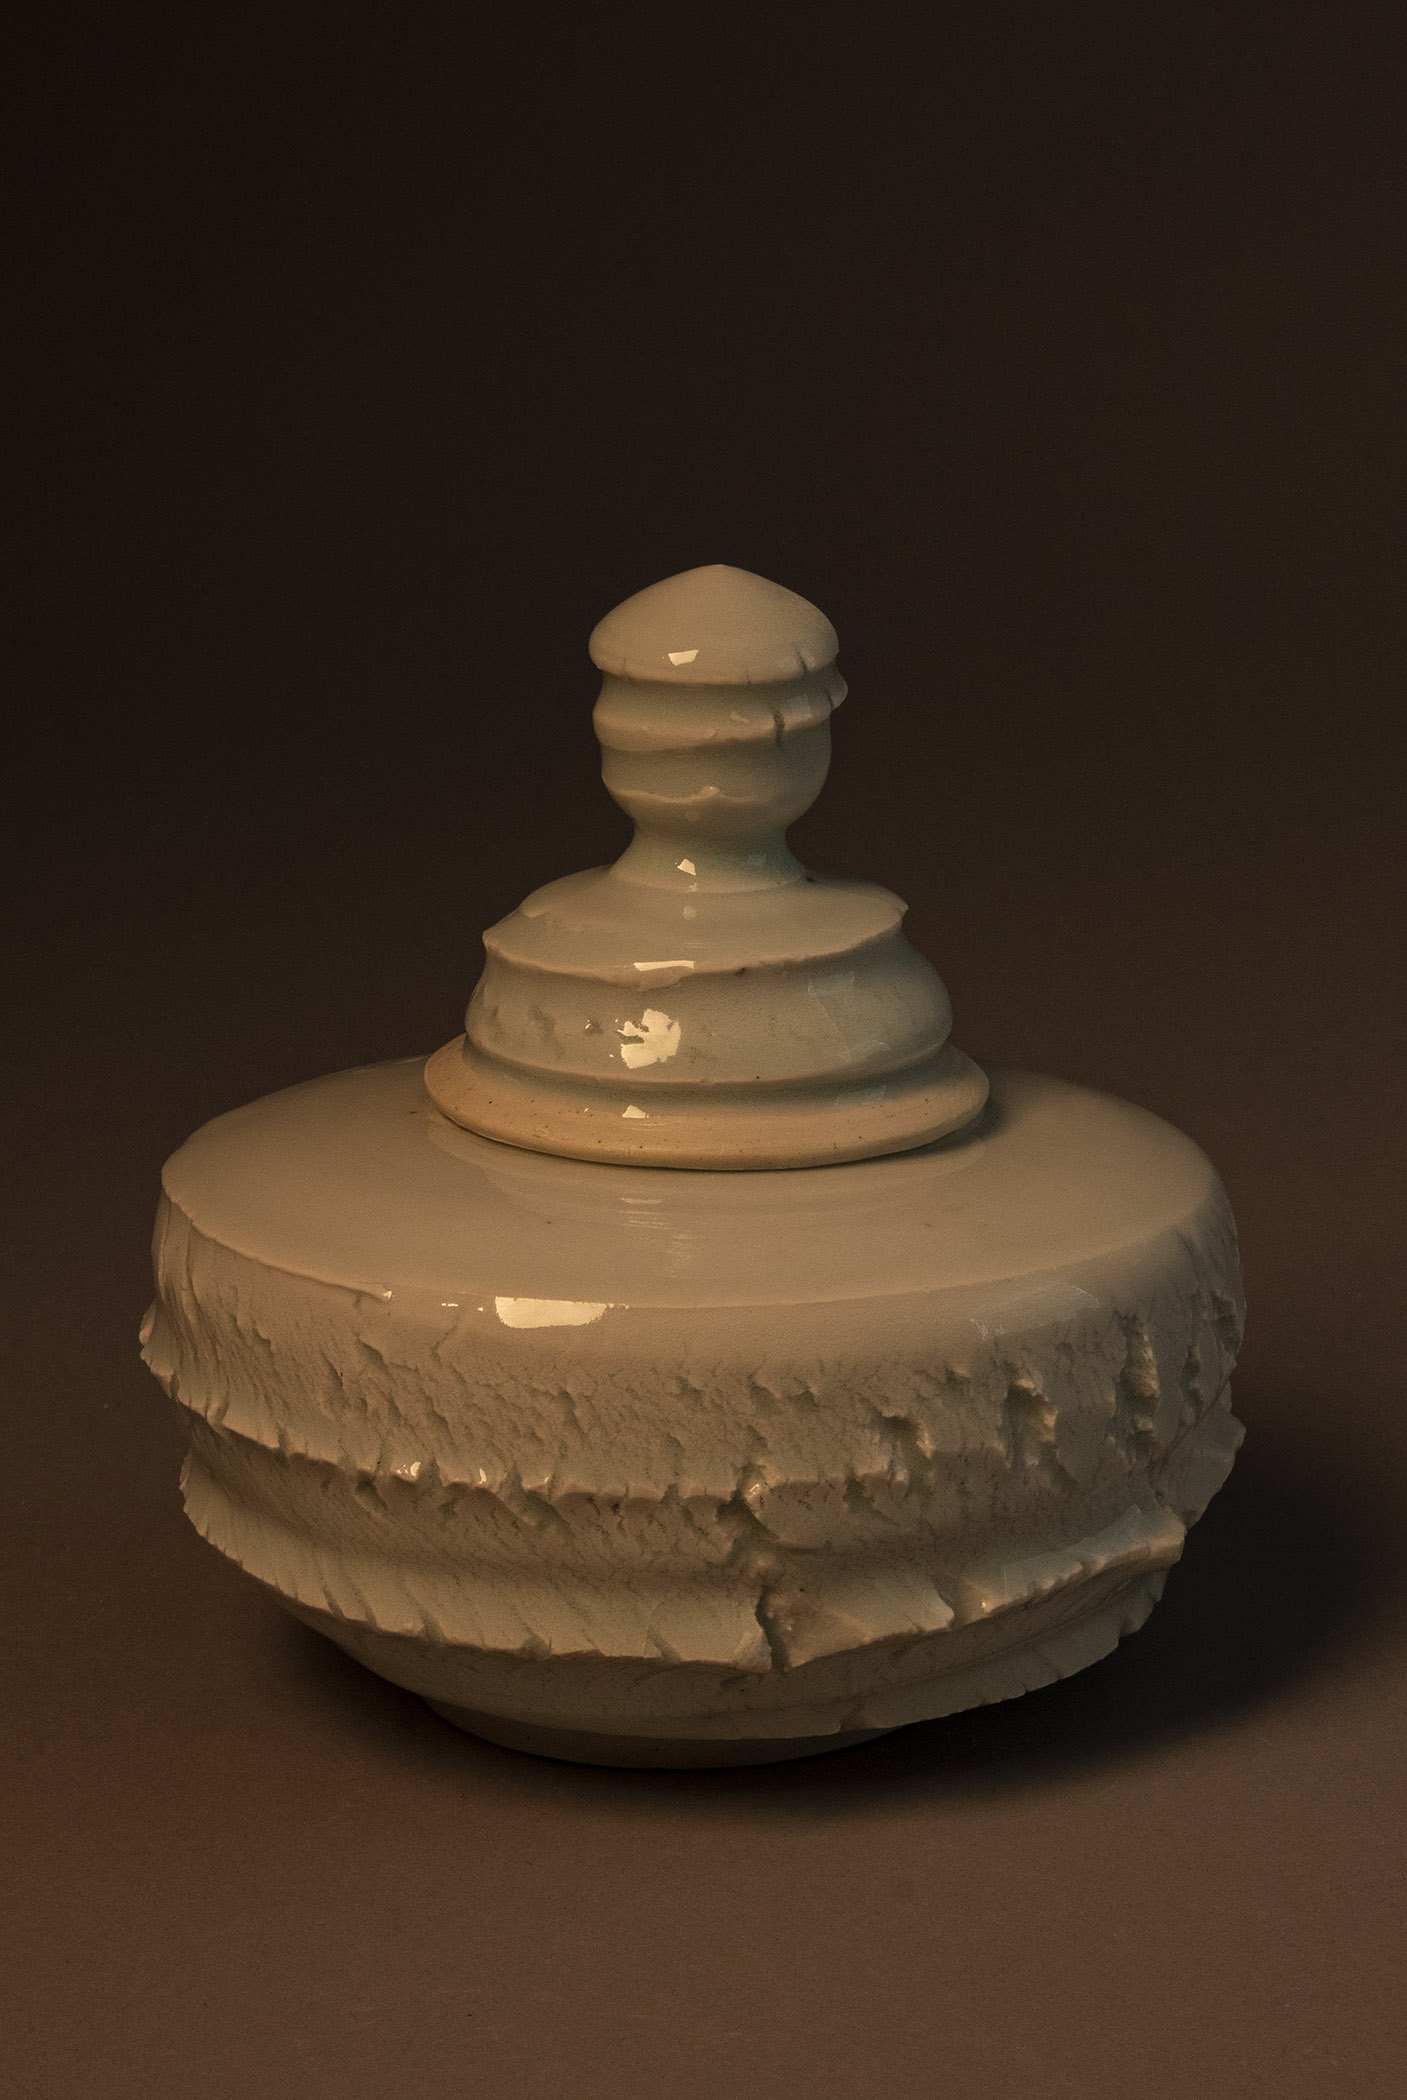 A lidded jar with a barrel-shaped body that is wider than it is tall. The body of the pot has nearly horizontal raised lines wrapping around it that are slightly abrasive to the touch. The lid is bell-shaped, but its profile is irregular due to the cutting into and stretching of the exterior surface. The lower rim of the lid is unglazed and smooth, while the upper portion and the knob toping it both have the texture of stretching and breaking clay. The glaze covering the piece (with the exception of the rim of the lid) is glassy.